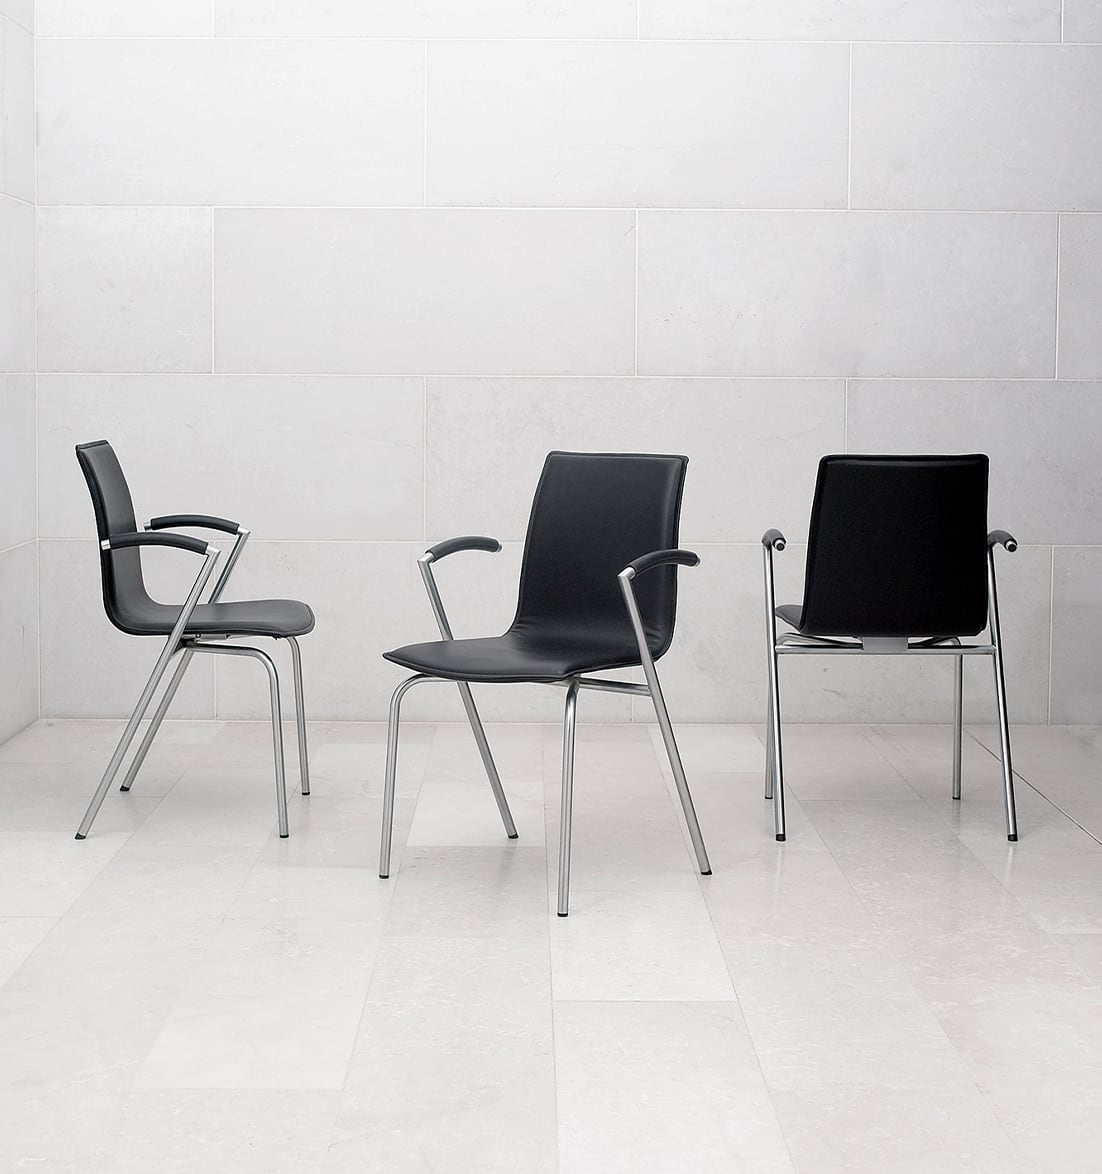 Three black chairs with arm rests in front of a white wall.